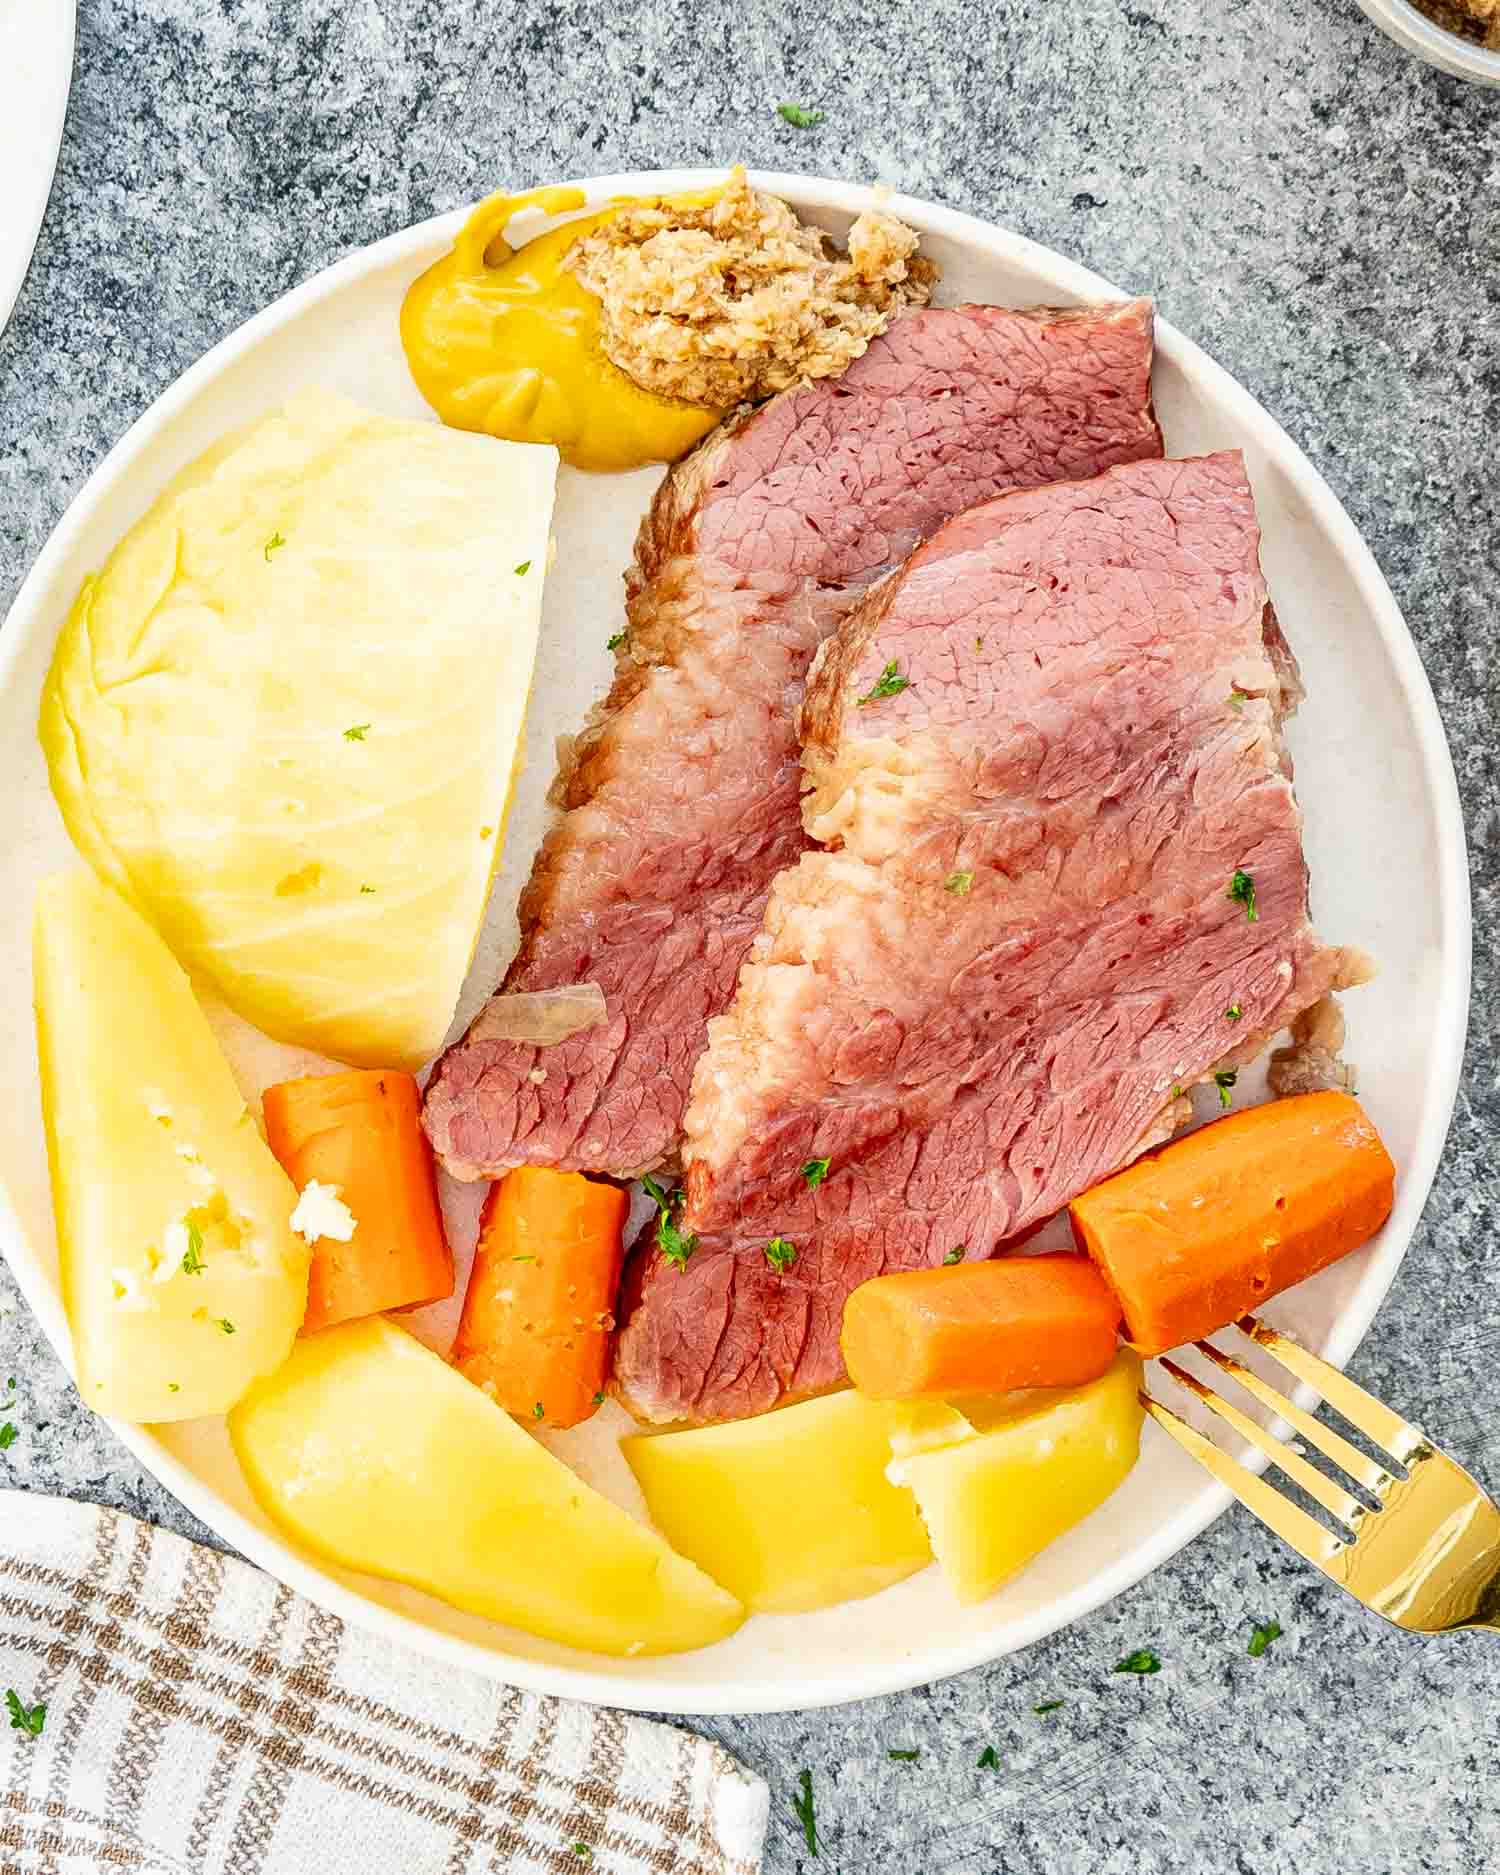 a serving of corned beef and cabbage on a white plate.